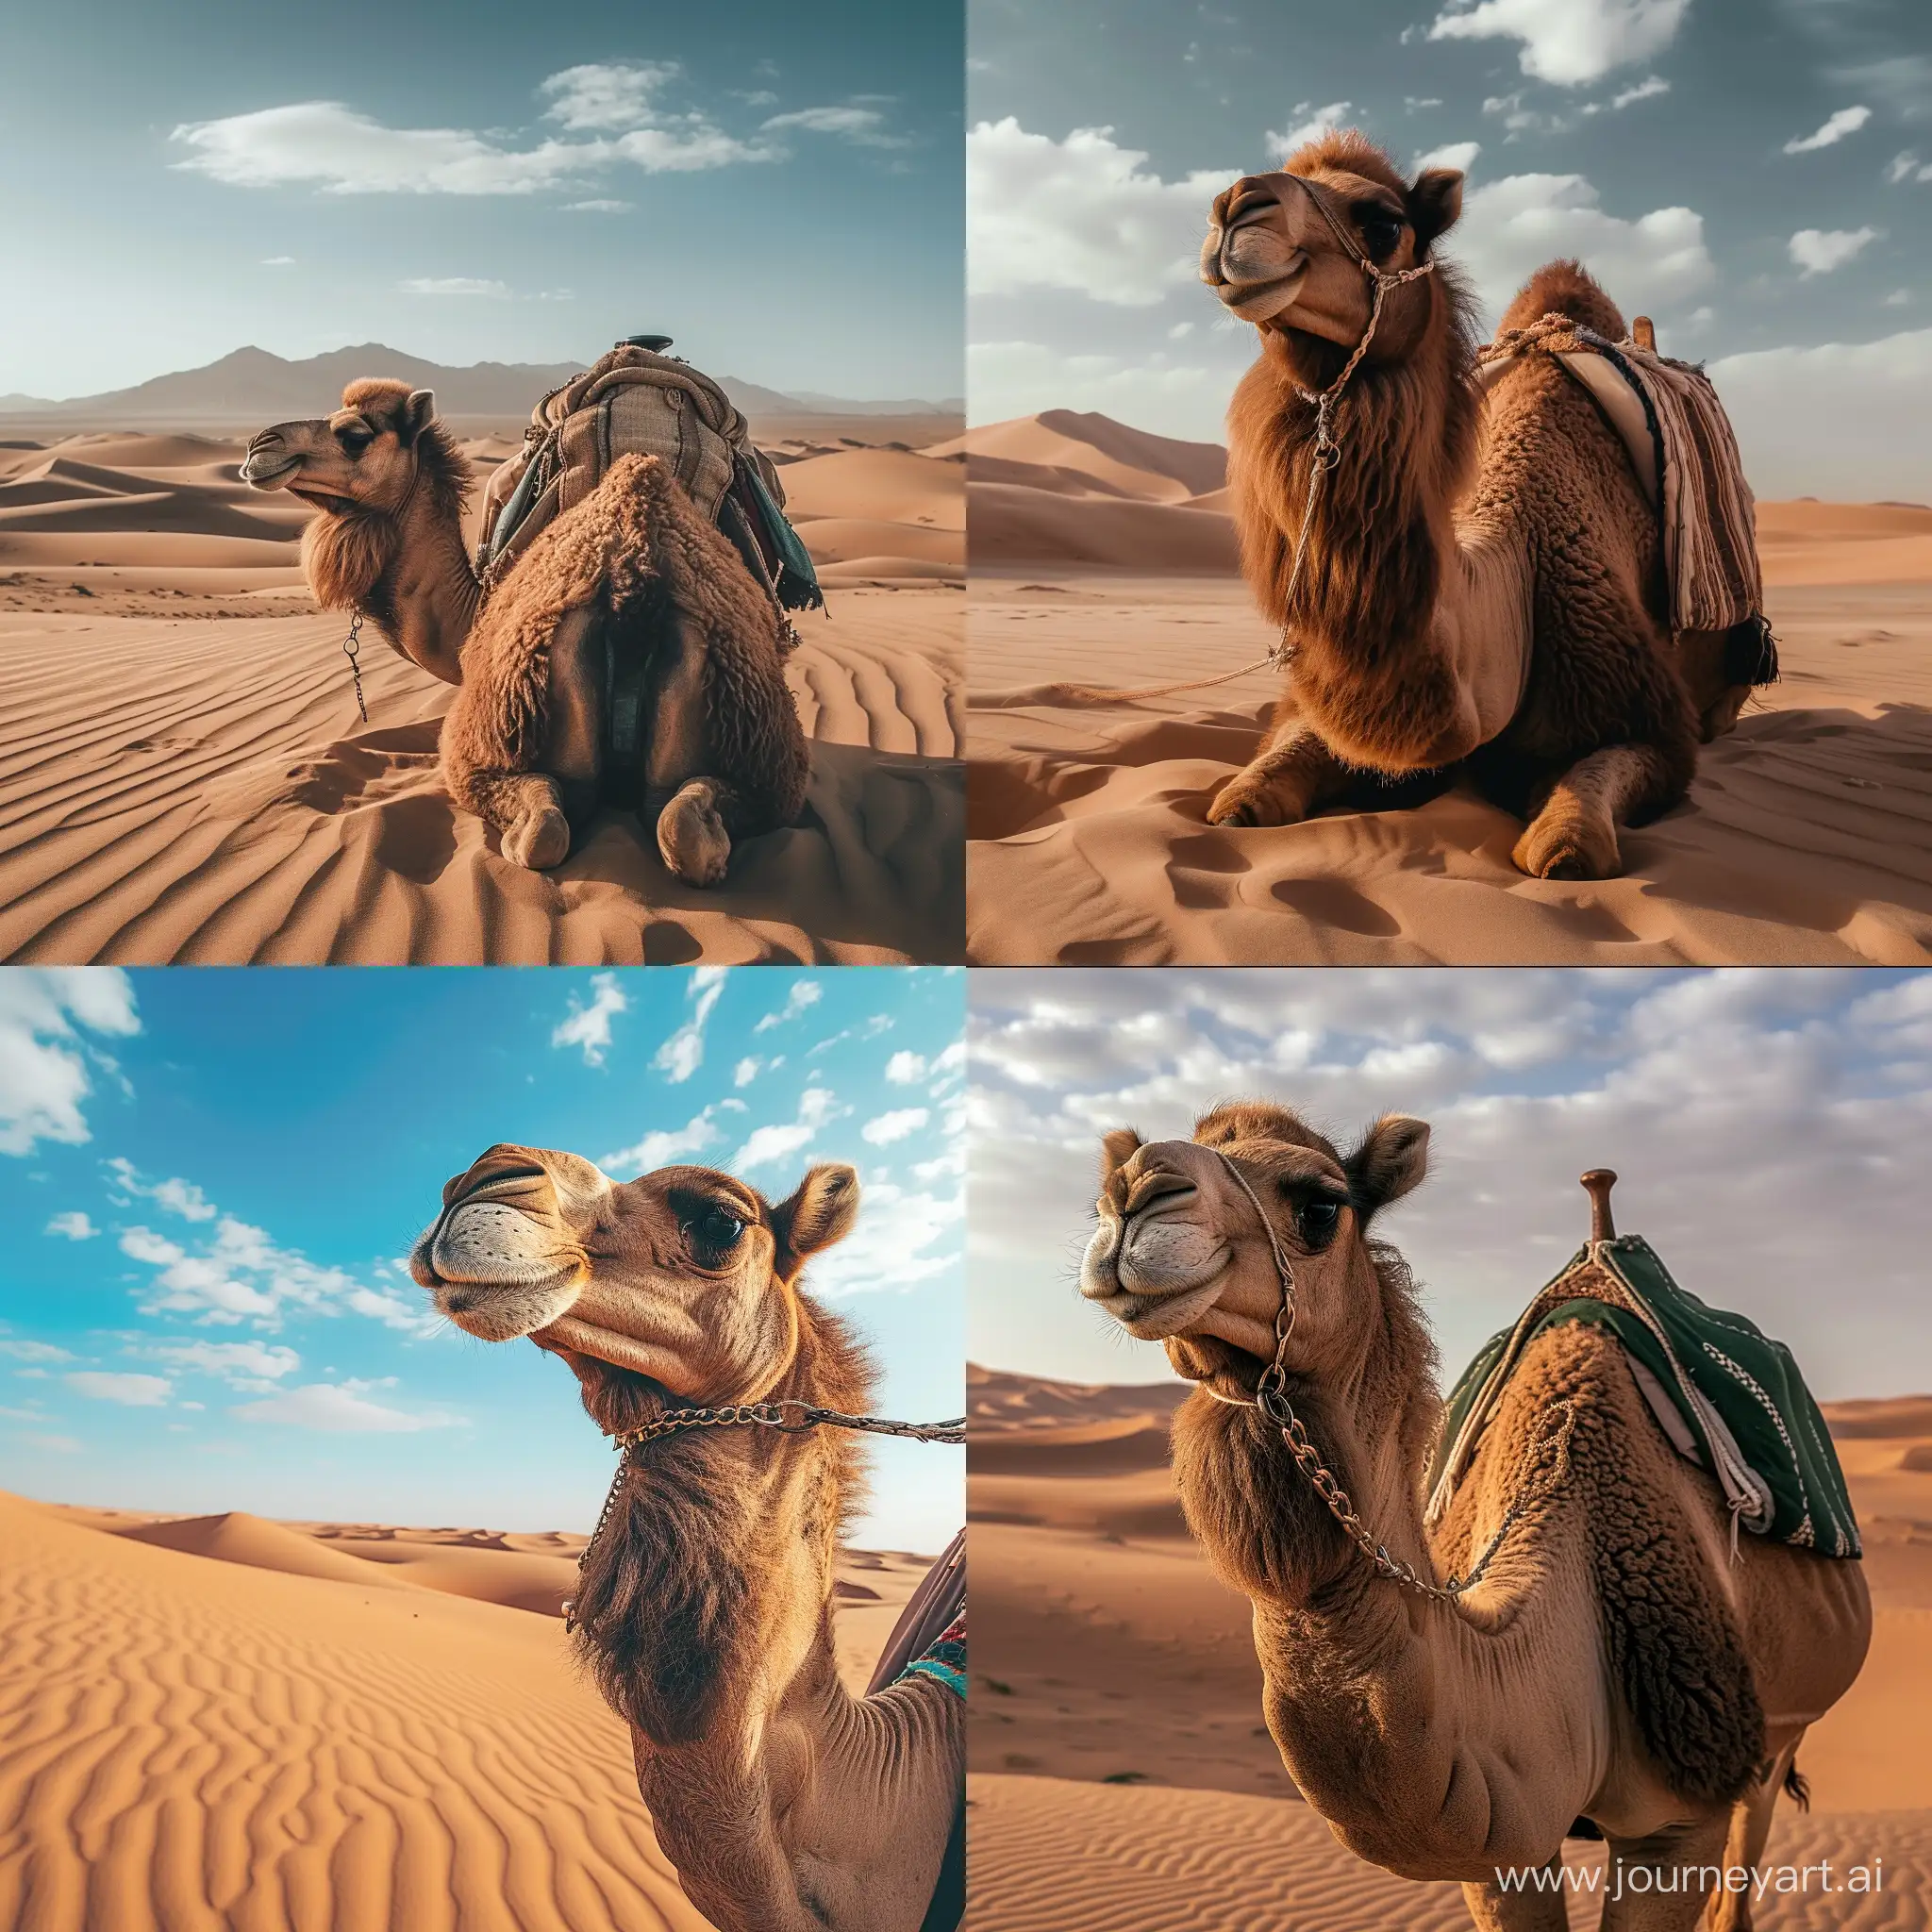 Loyal-Camel-Rescues-Friend-Ship-in-the-Desert